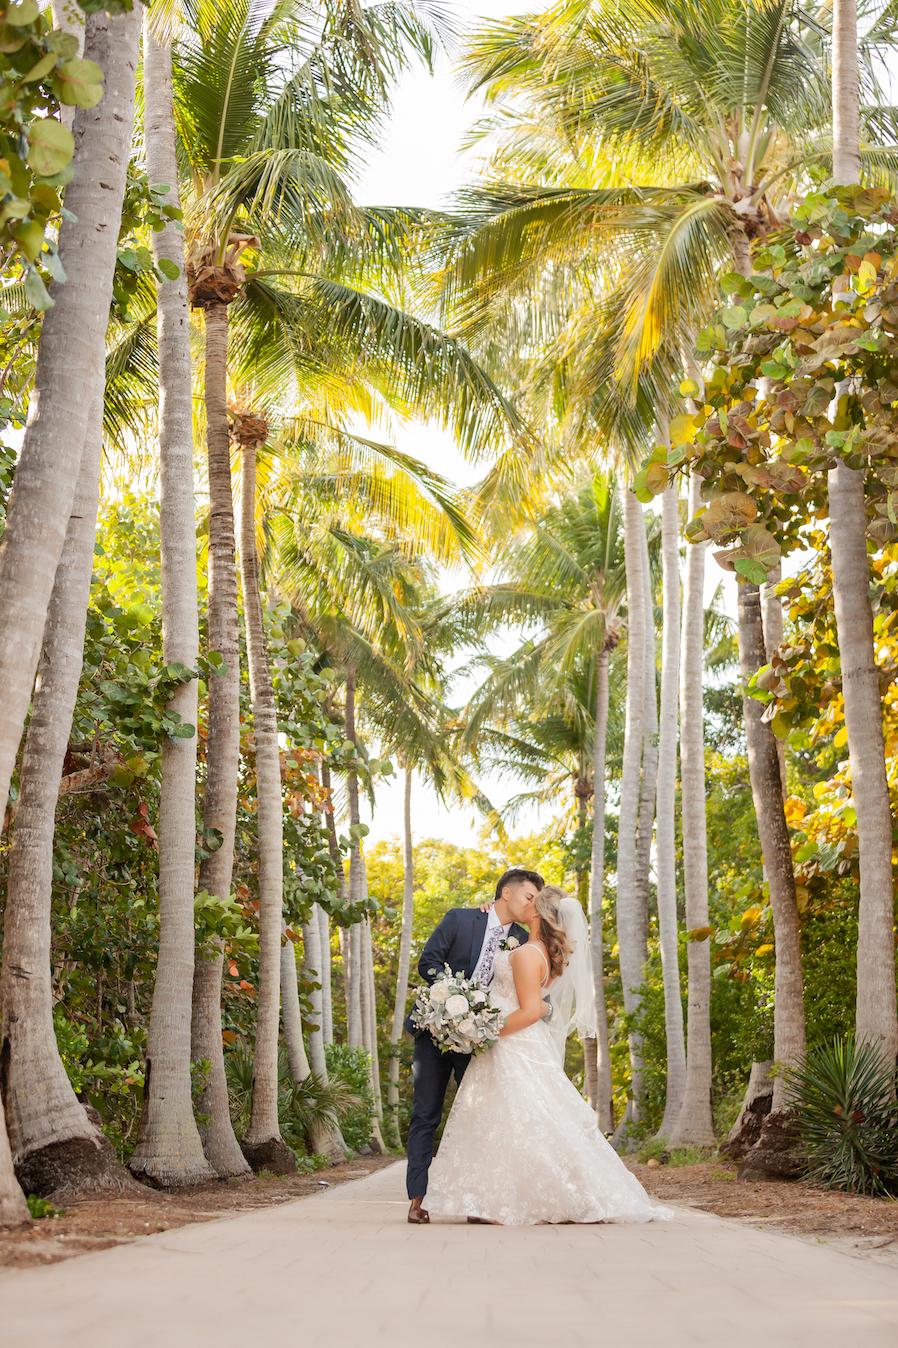 Bill Baggs State Park Weddings - Palm Trees and Couple Embracing